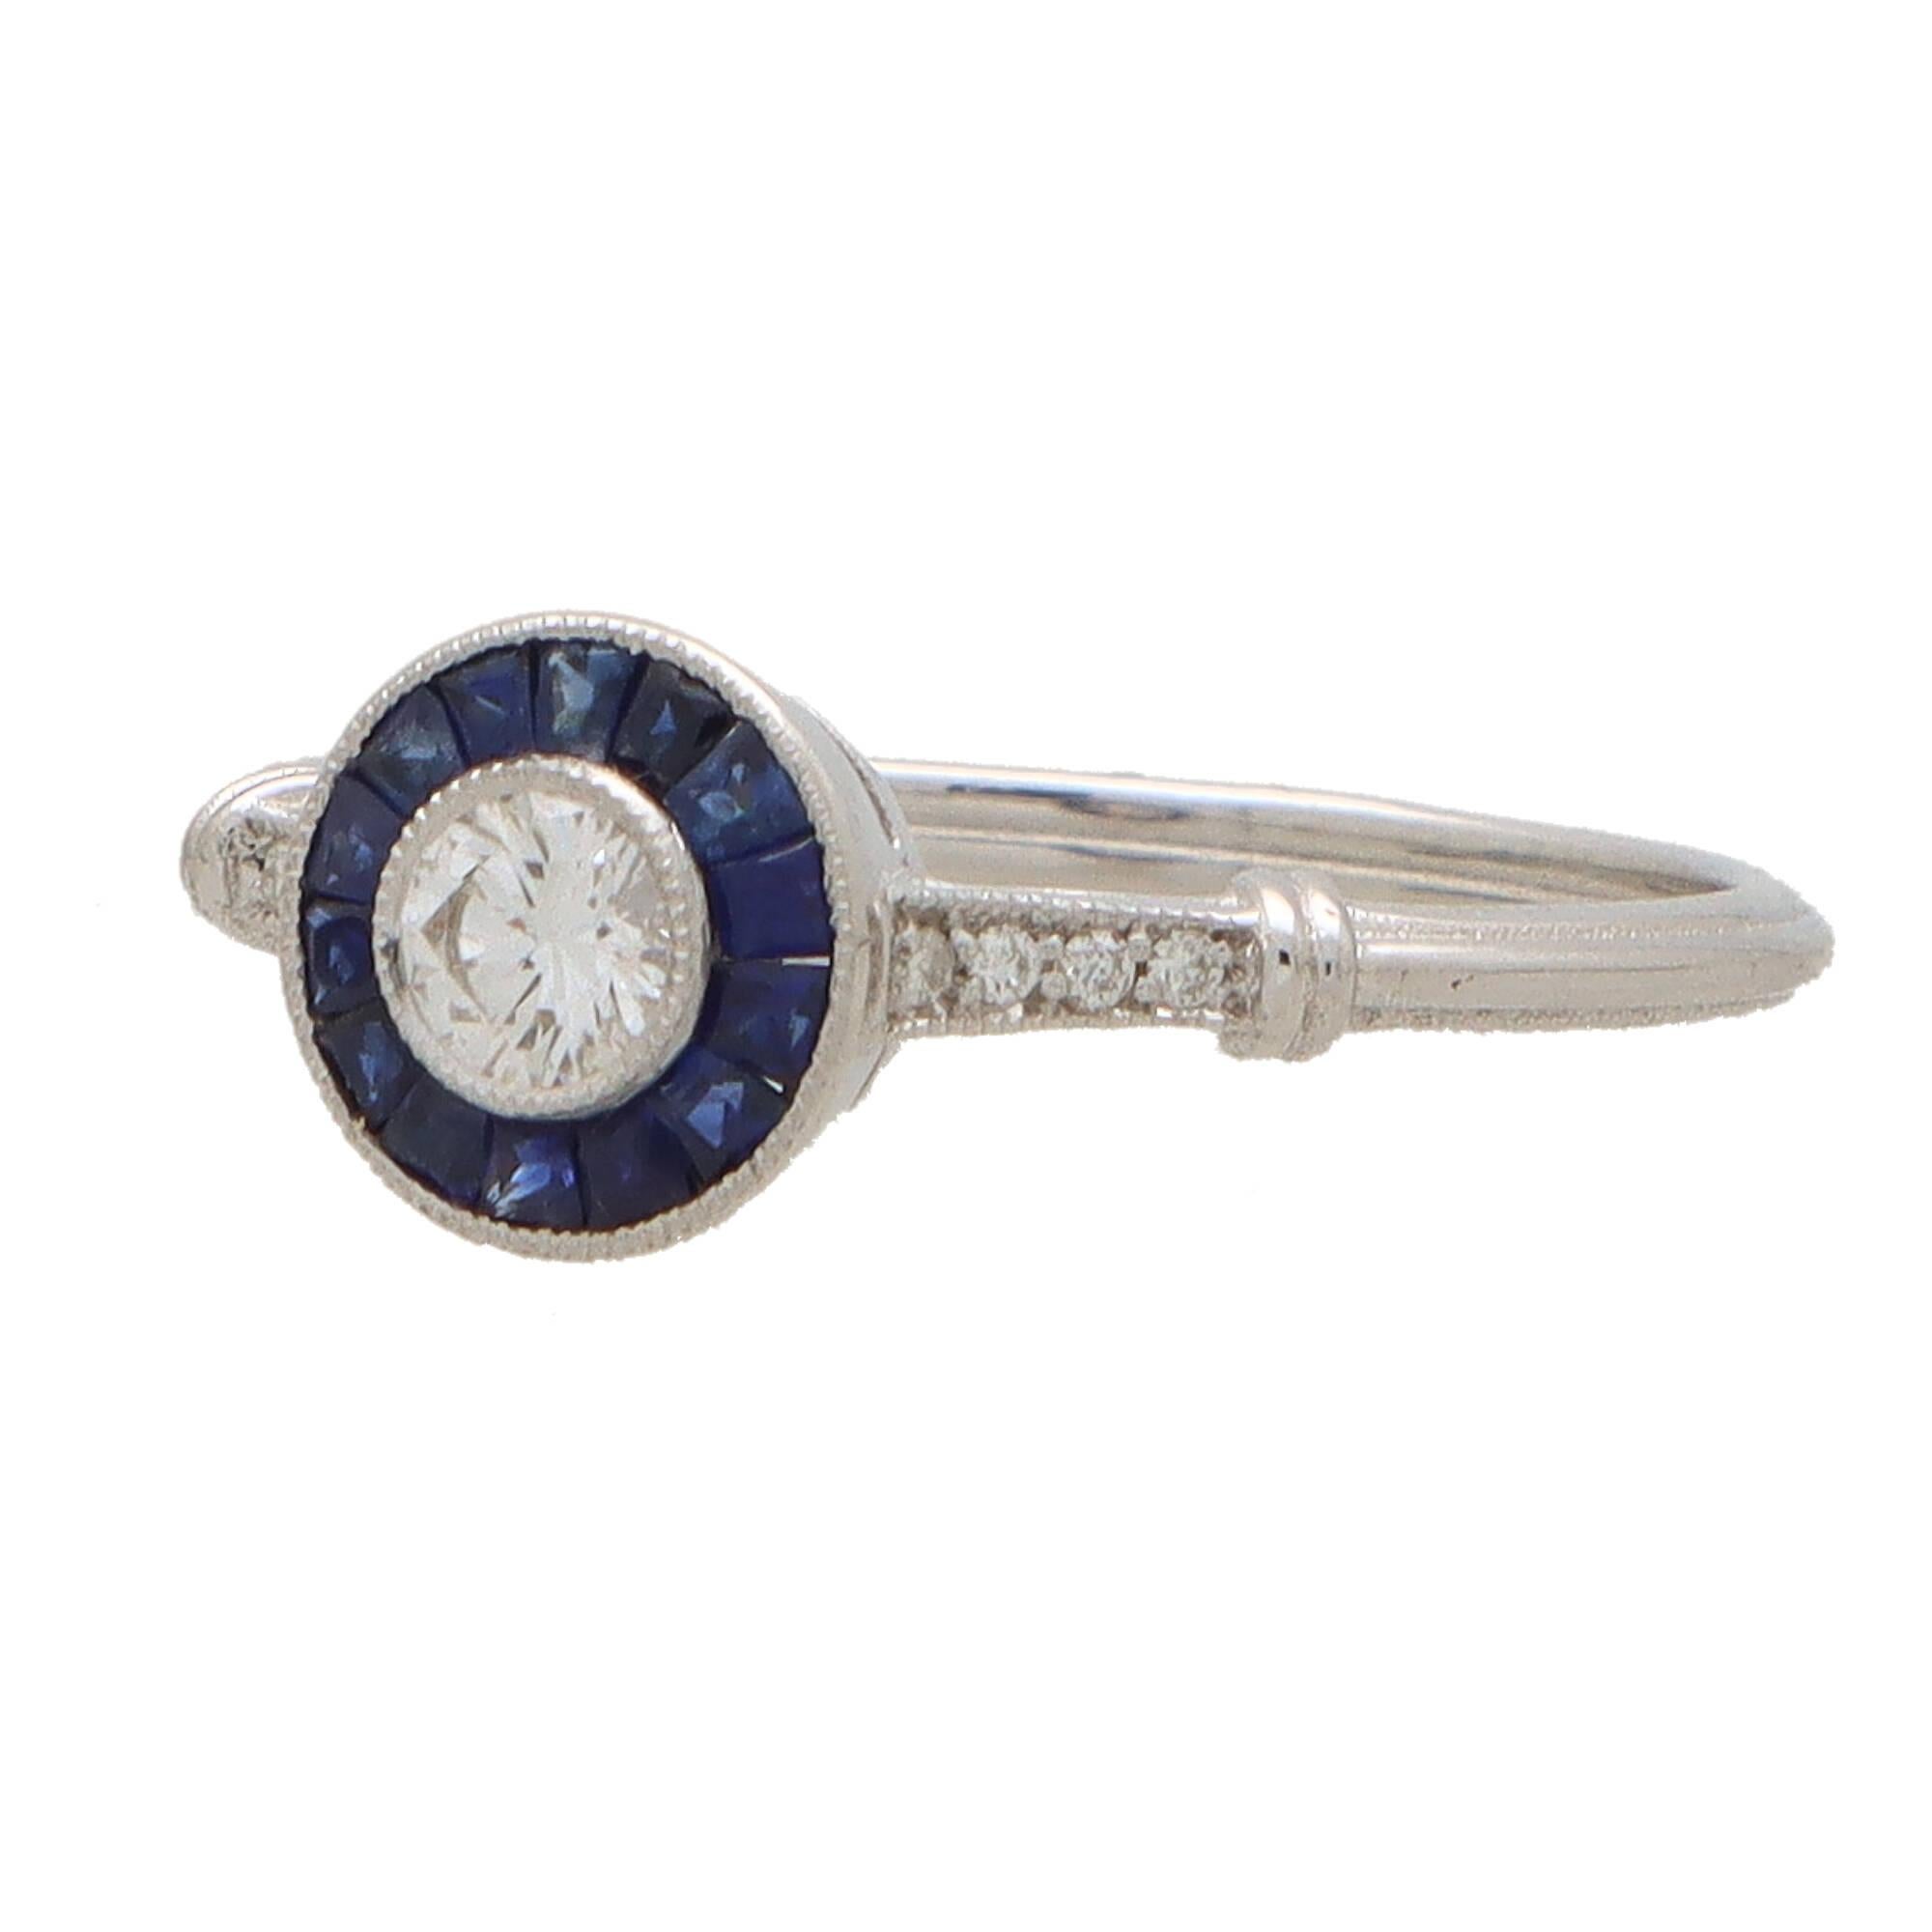 A beautiful Art Deco inspired diamond and sapphire ring set in 18k white gold.

This elegant ring is centrally set with a sparkly round brilliant cut diamond which is millegrain set. The diamond is then surrounded by a target of calibre cut blue